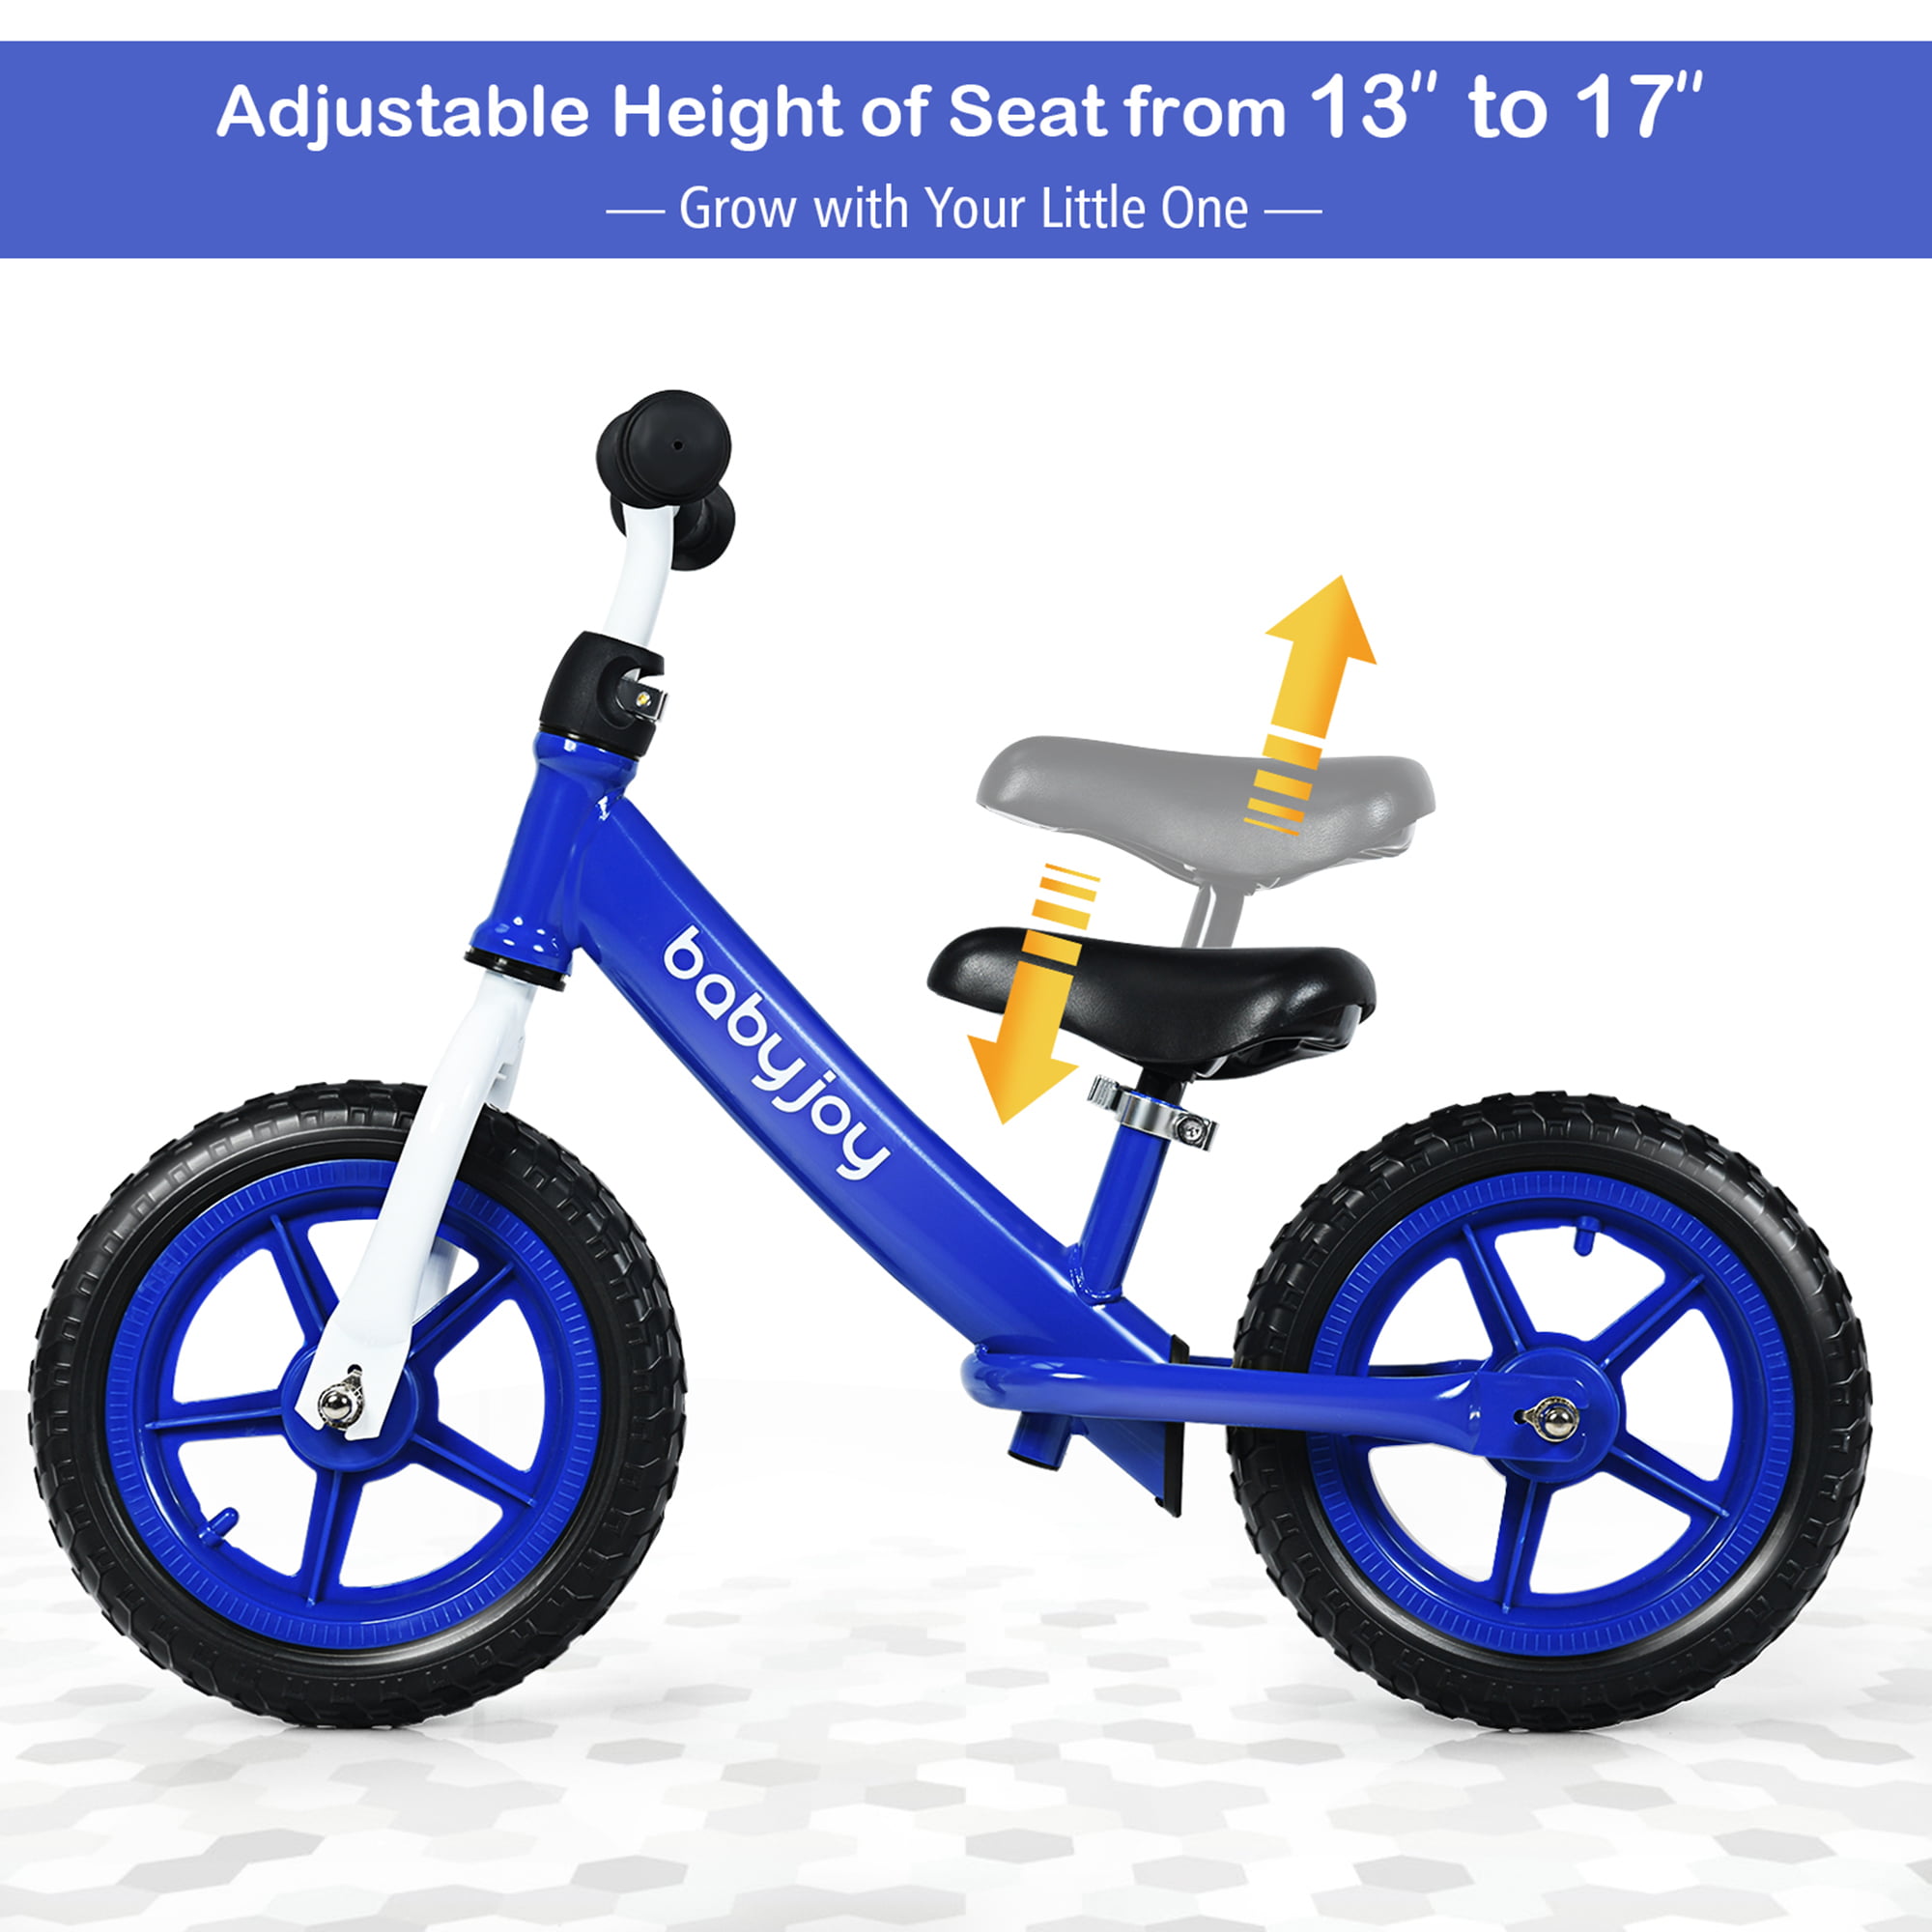 Details about   12" Balance Bike Kids No-Pedal Learn To Ride Pre Bike w/ Adjustable Seat Blue 